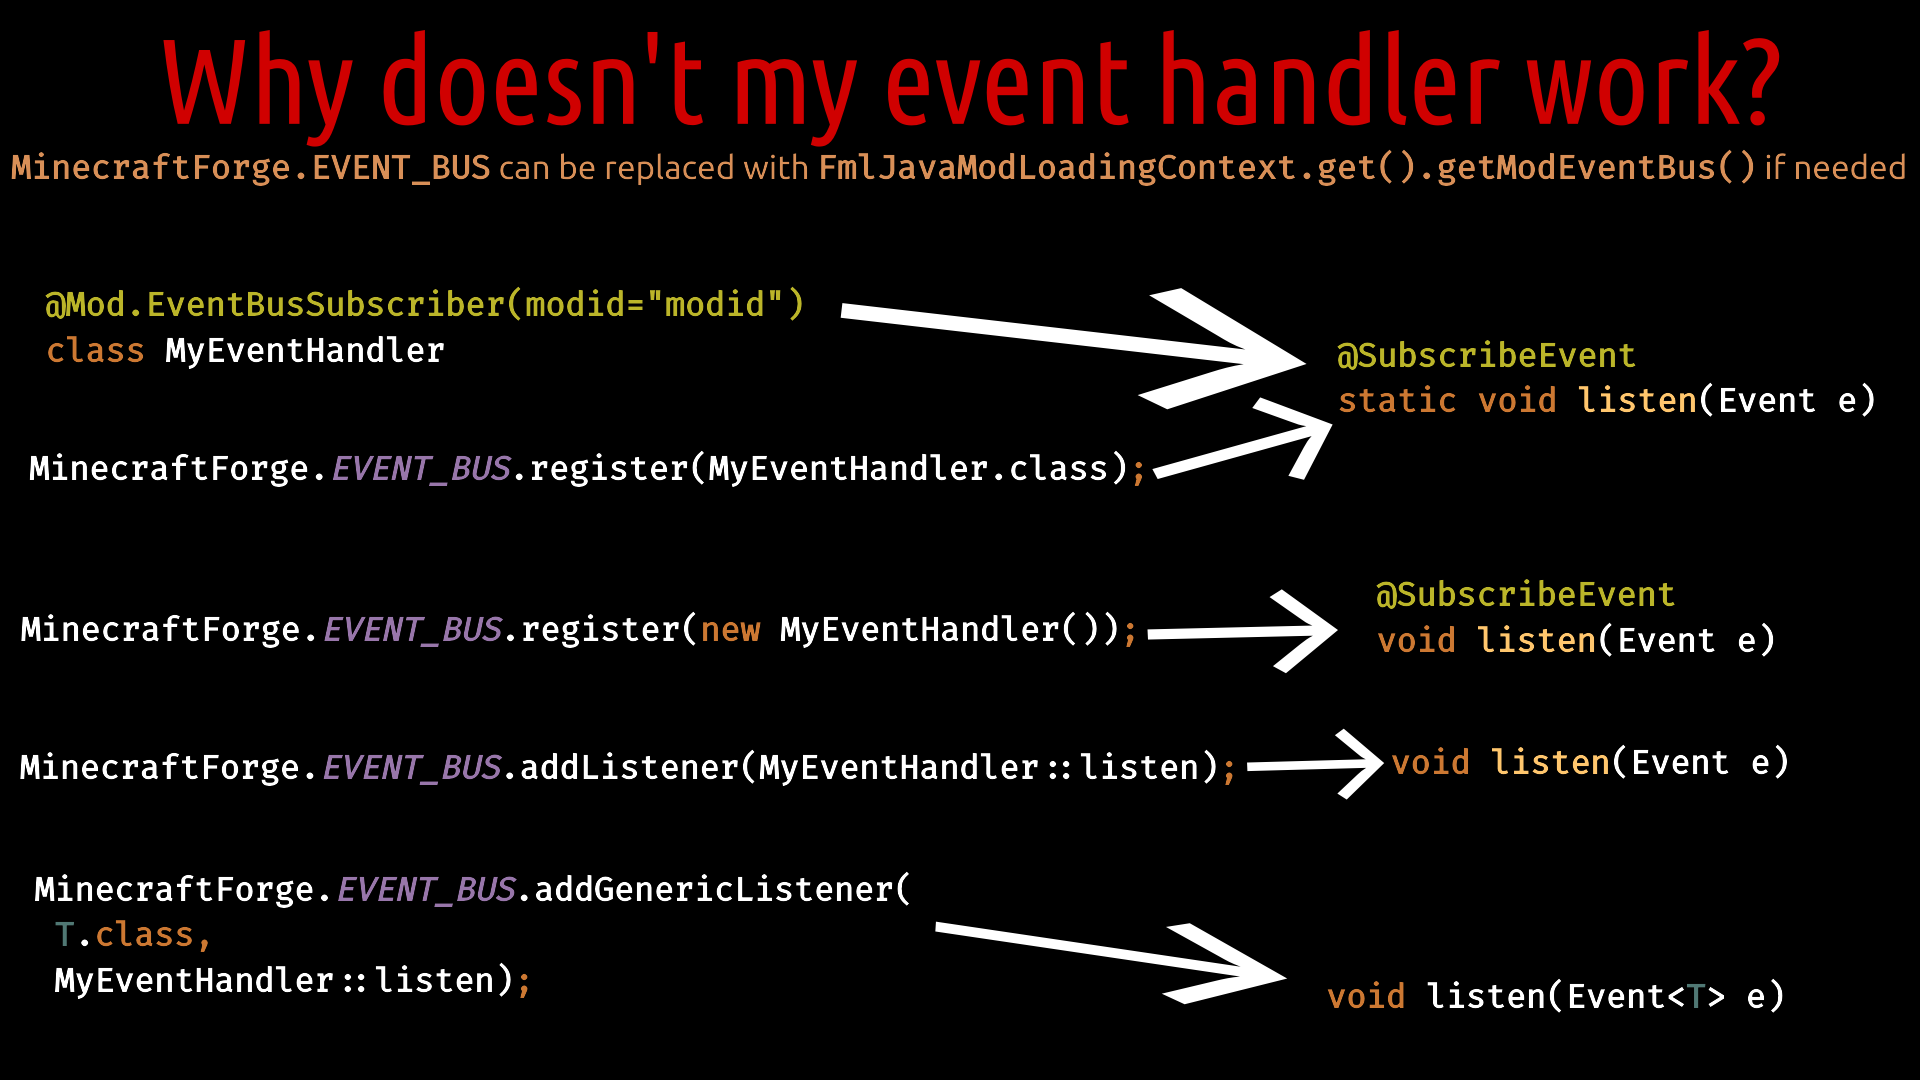 All available ways to register an event handler. Credits to Will BL of the MMD discord.